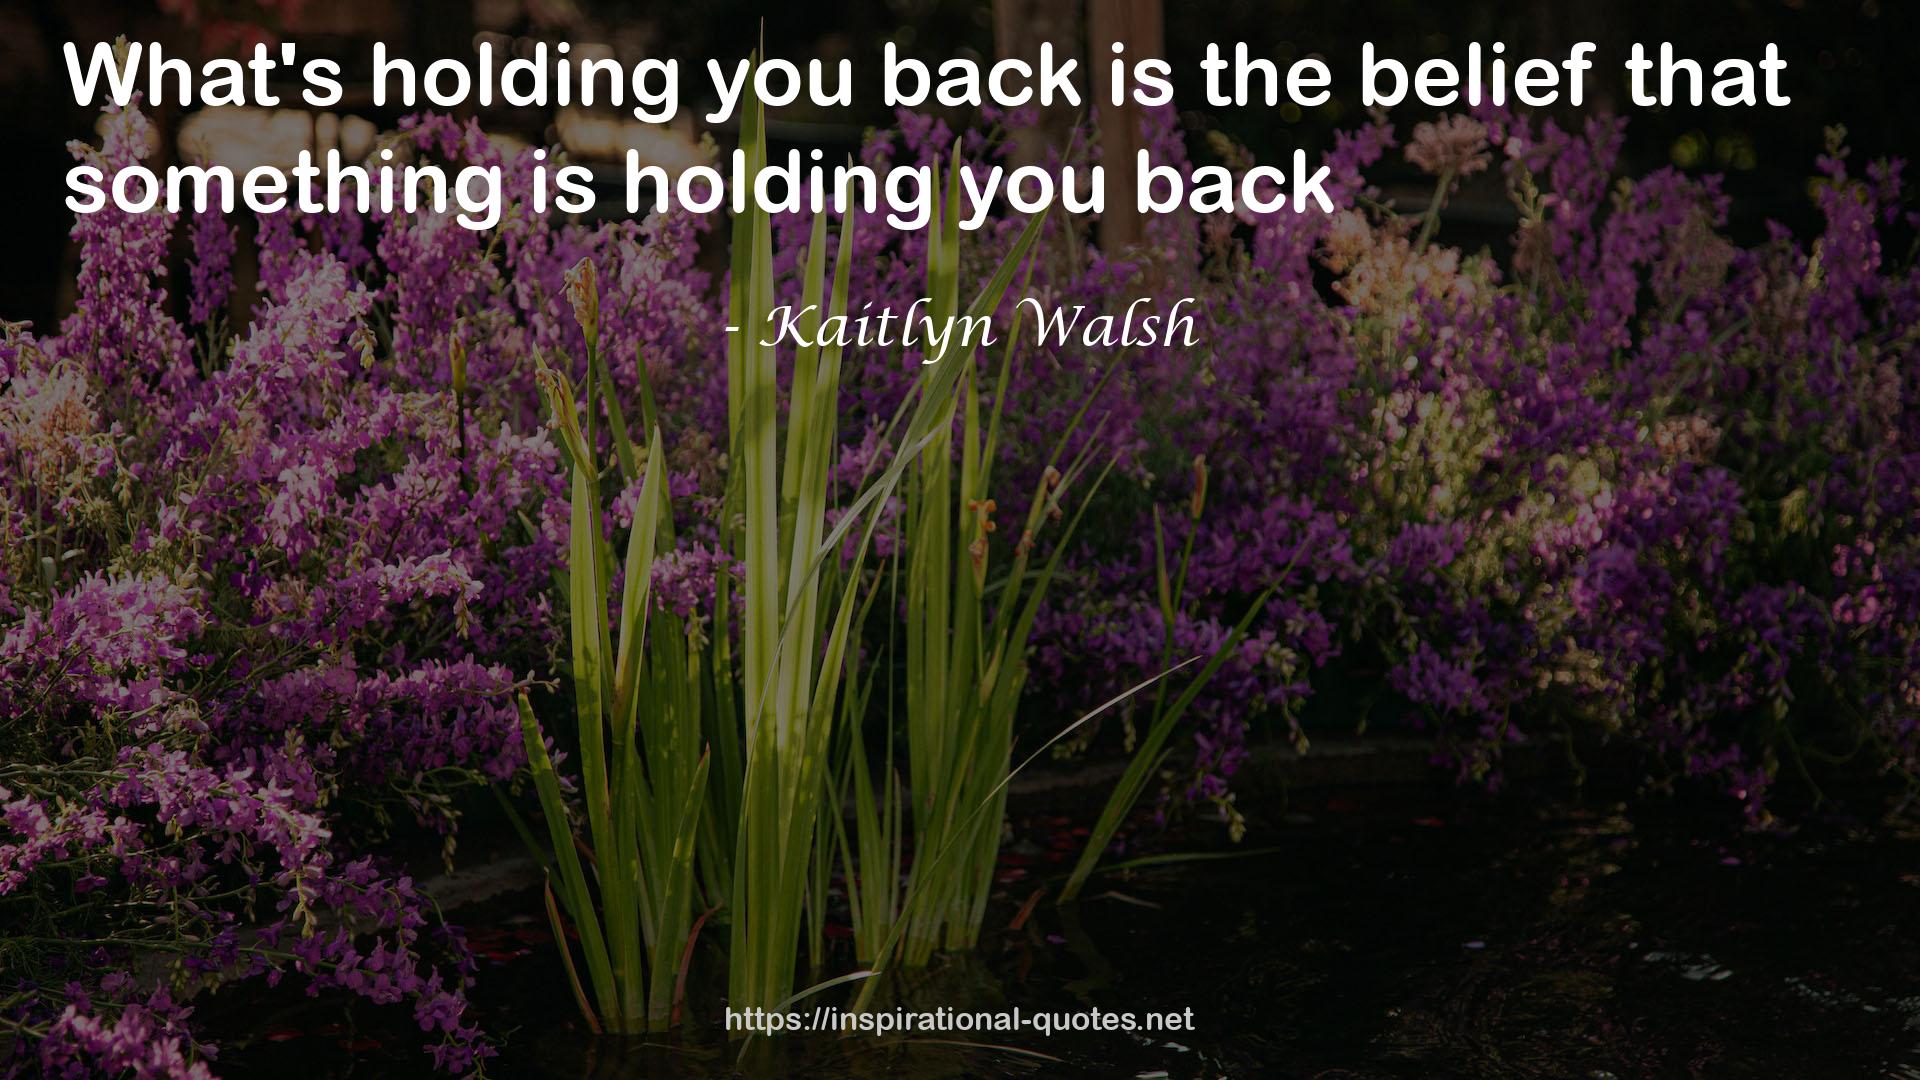 Kaitlyn Walsh QUOTES